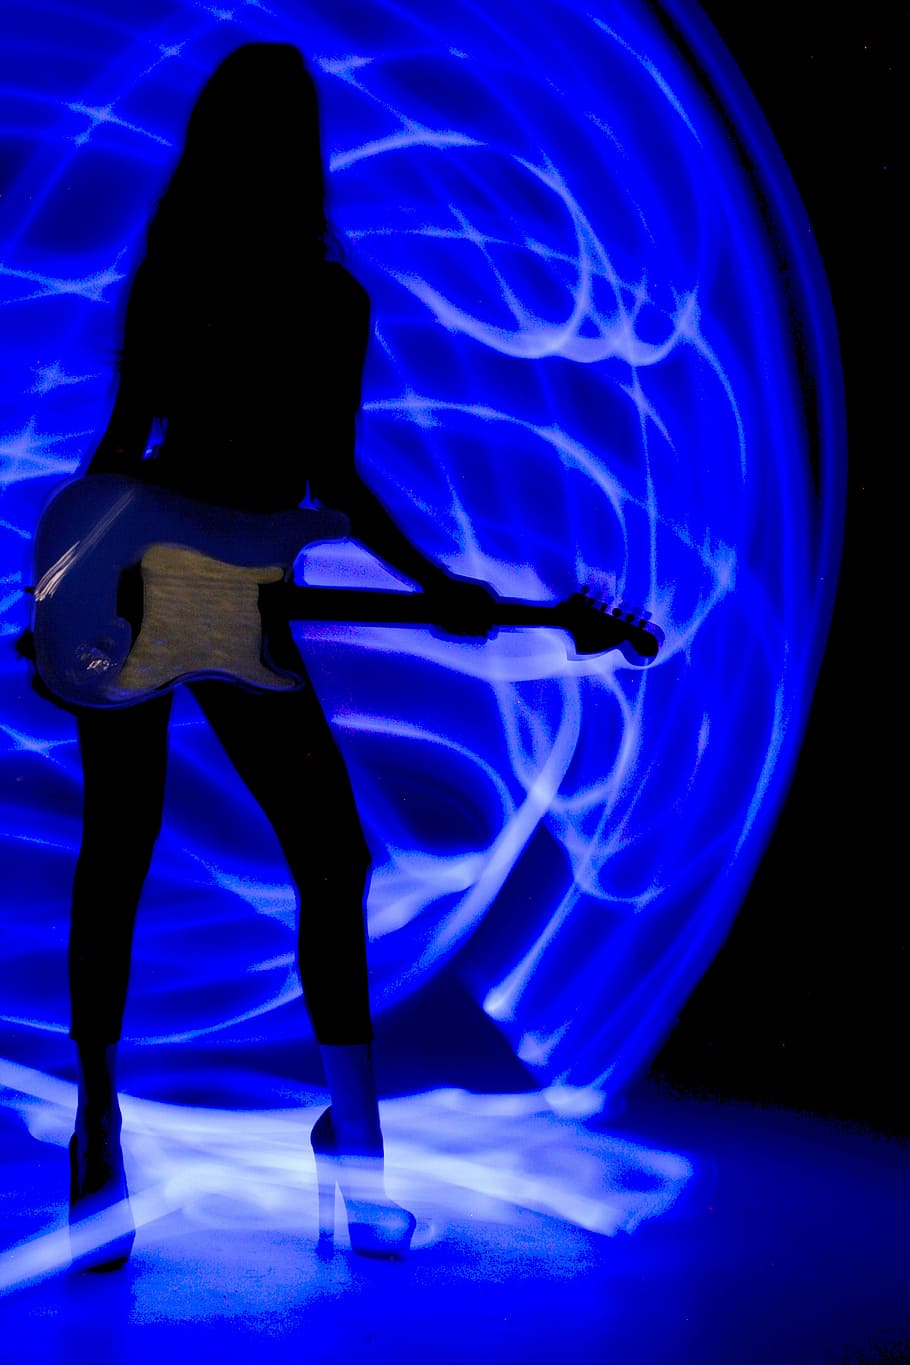 A woman holding a guitar in front of a blue background - Neon blue, guitar